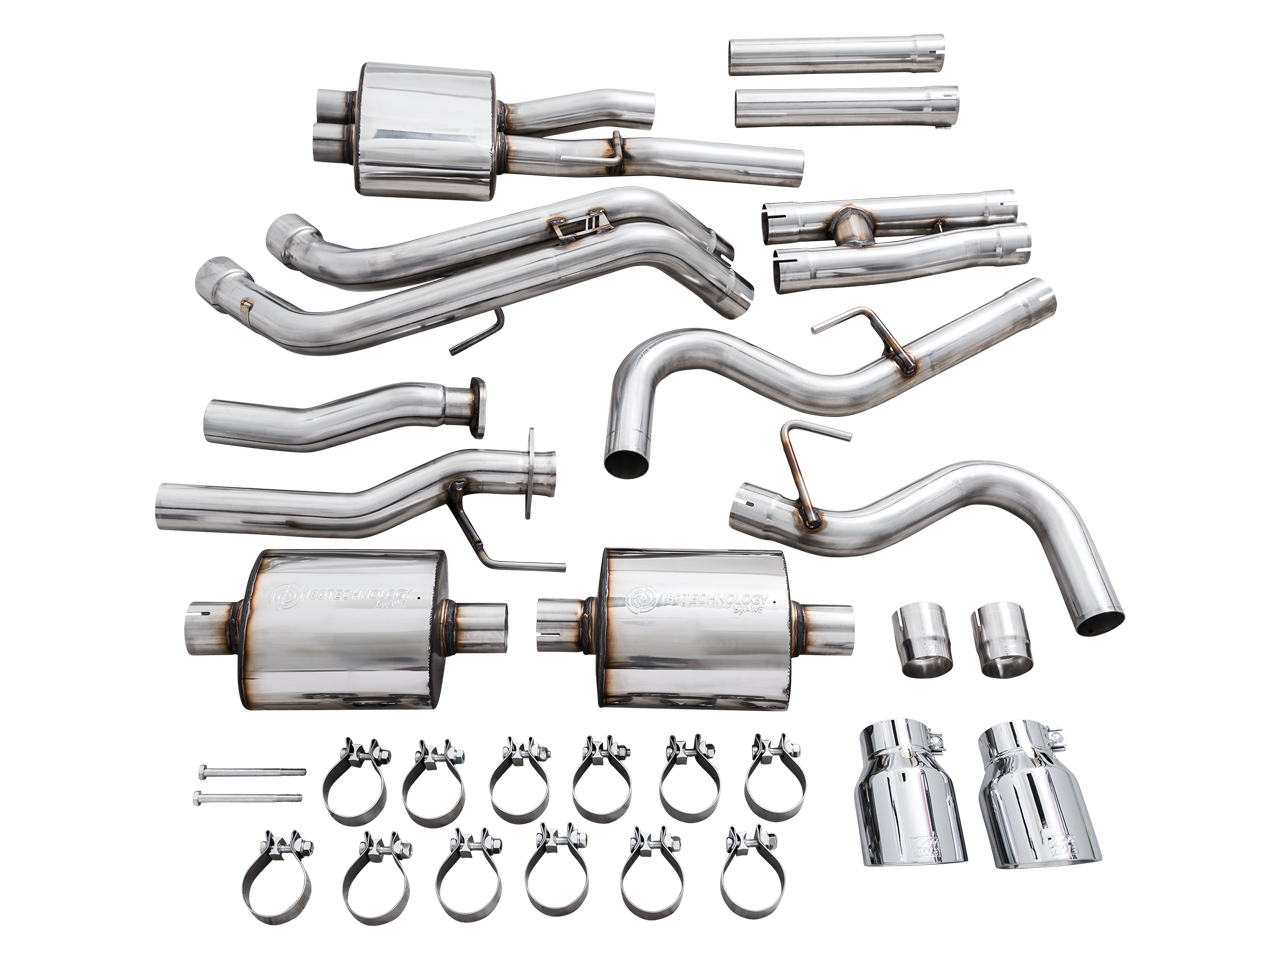 AWE 0FG Exhaust with BashGuard for 3rd Gen Tacoma - Dual Chrome Silver Tips